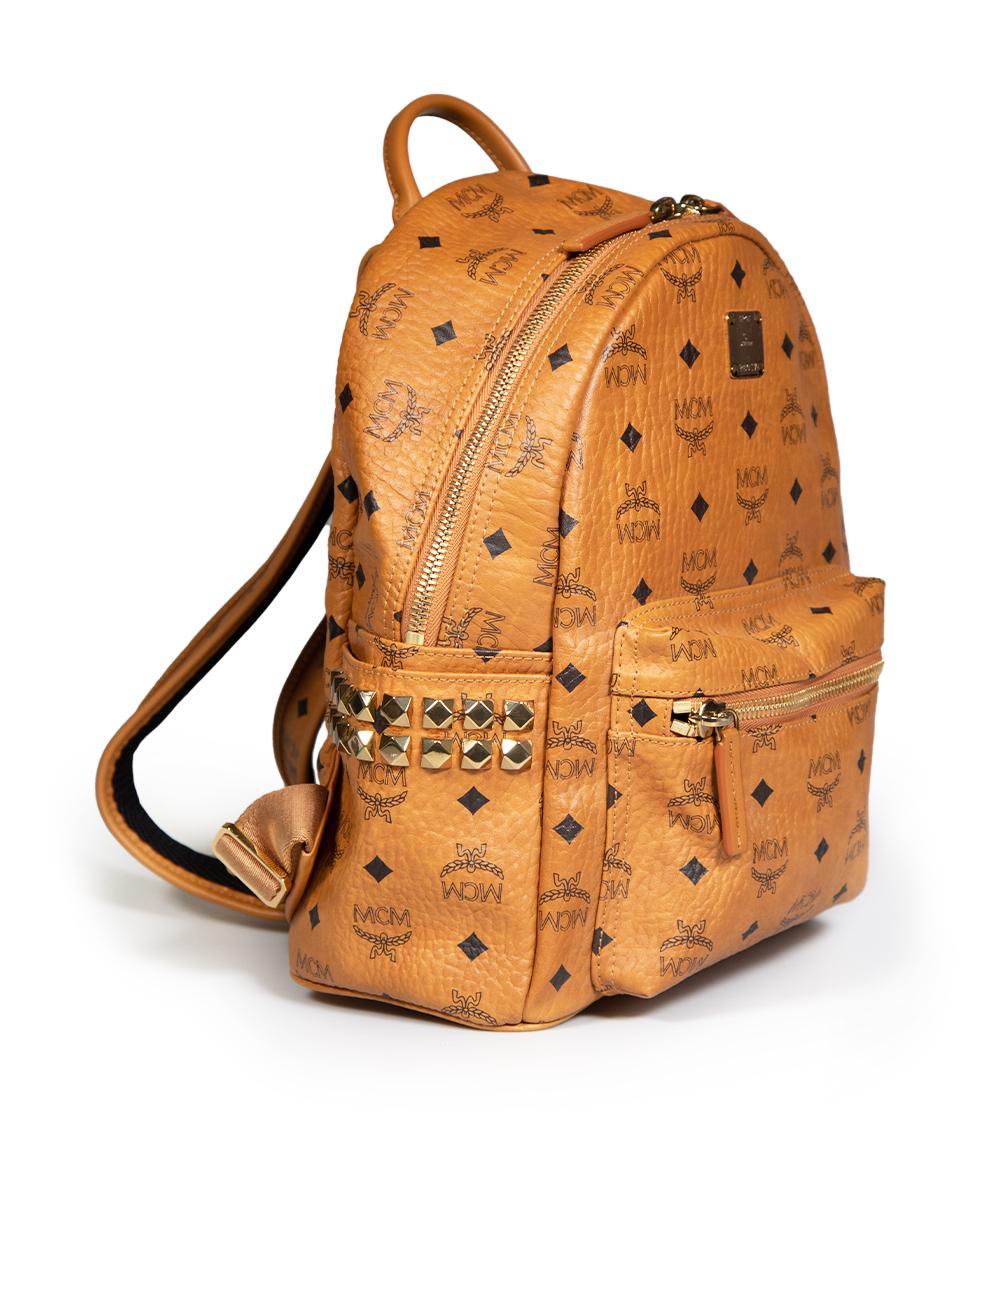 CONDITION is Very good. Minimal wear to bag is evident. Minimal scratches to the hardware on this used MCM designer resale item.
 
 
 
 Details
 
 
 Model: Stark
 
 Brown
 
 Leather
 
 Medium backpack
 
 Gold tone hardware
 
 side studded detail
 
